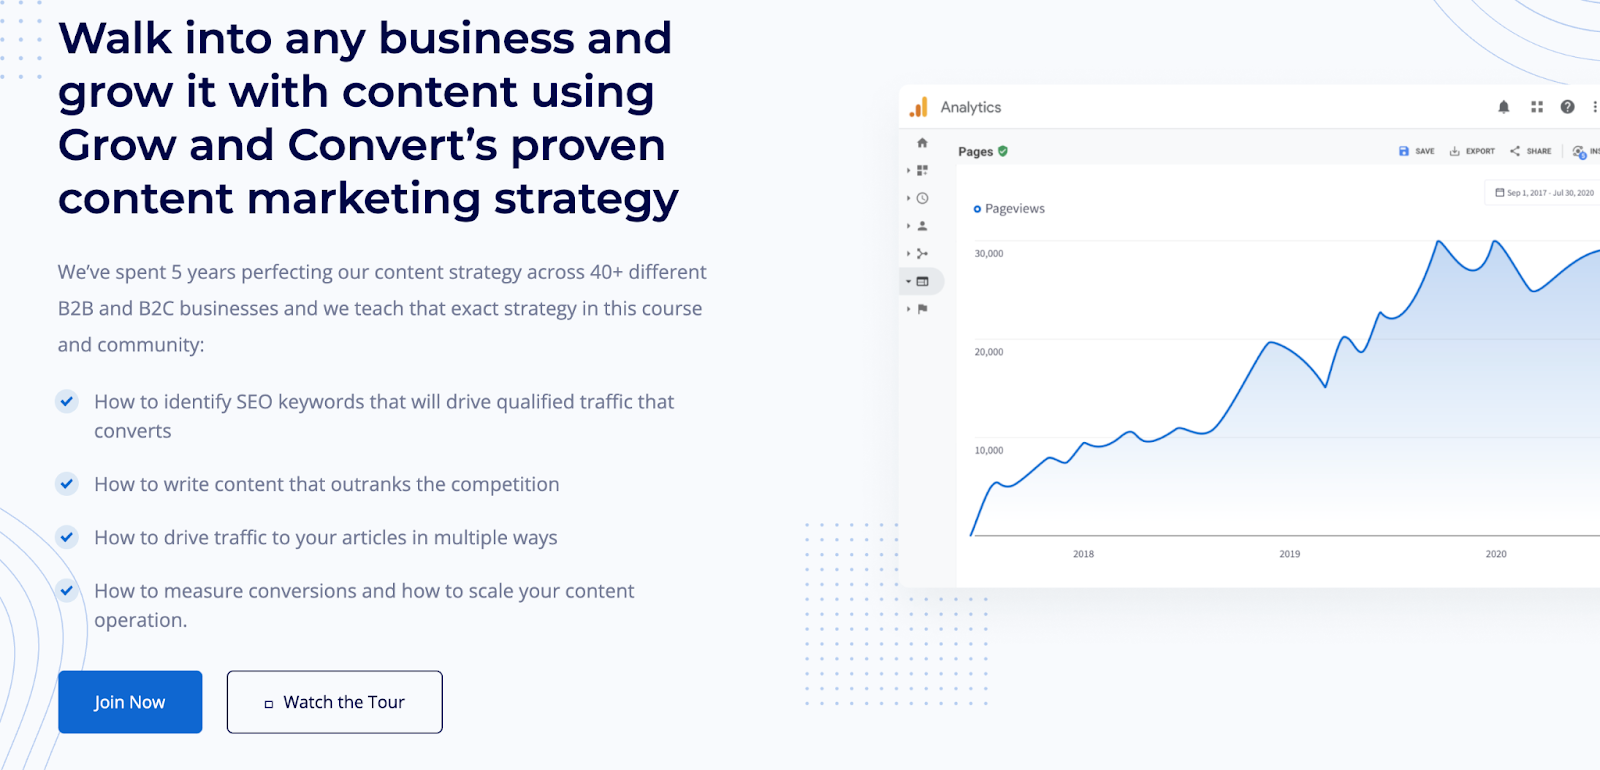 Walk into any business and grow it with content using Grow and Convert's proven content marketing strategy